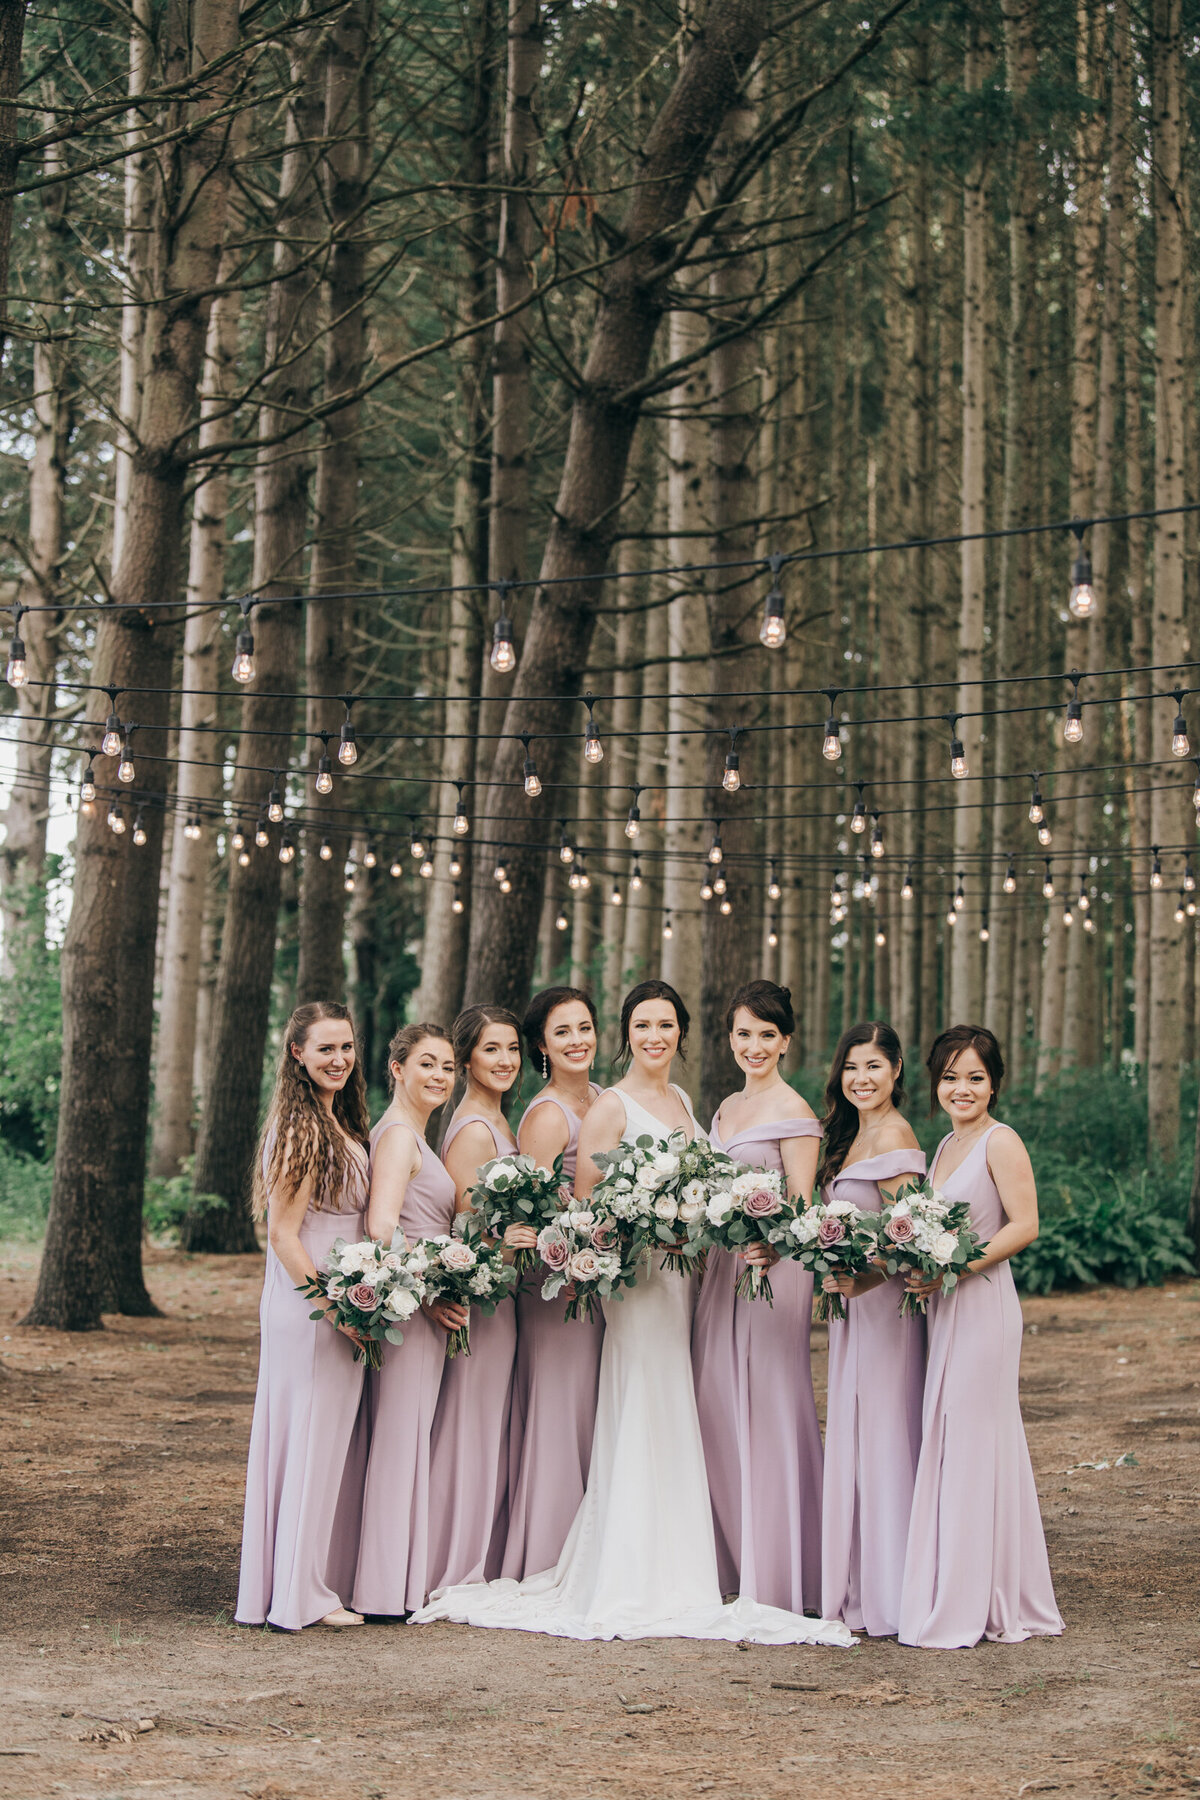 Elegant bridesmaids wearing lavender dresses while posing for photos in an enchanted forest